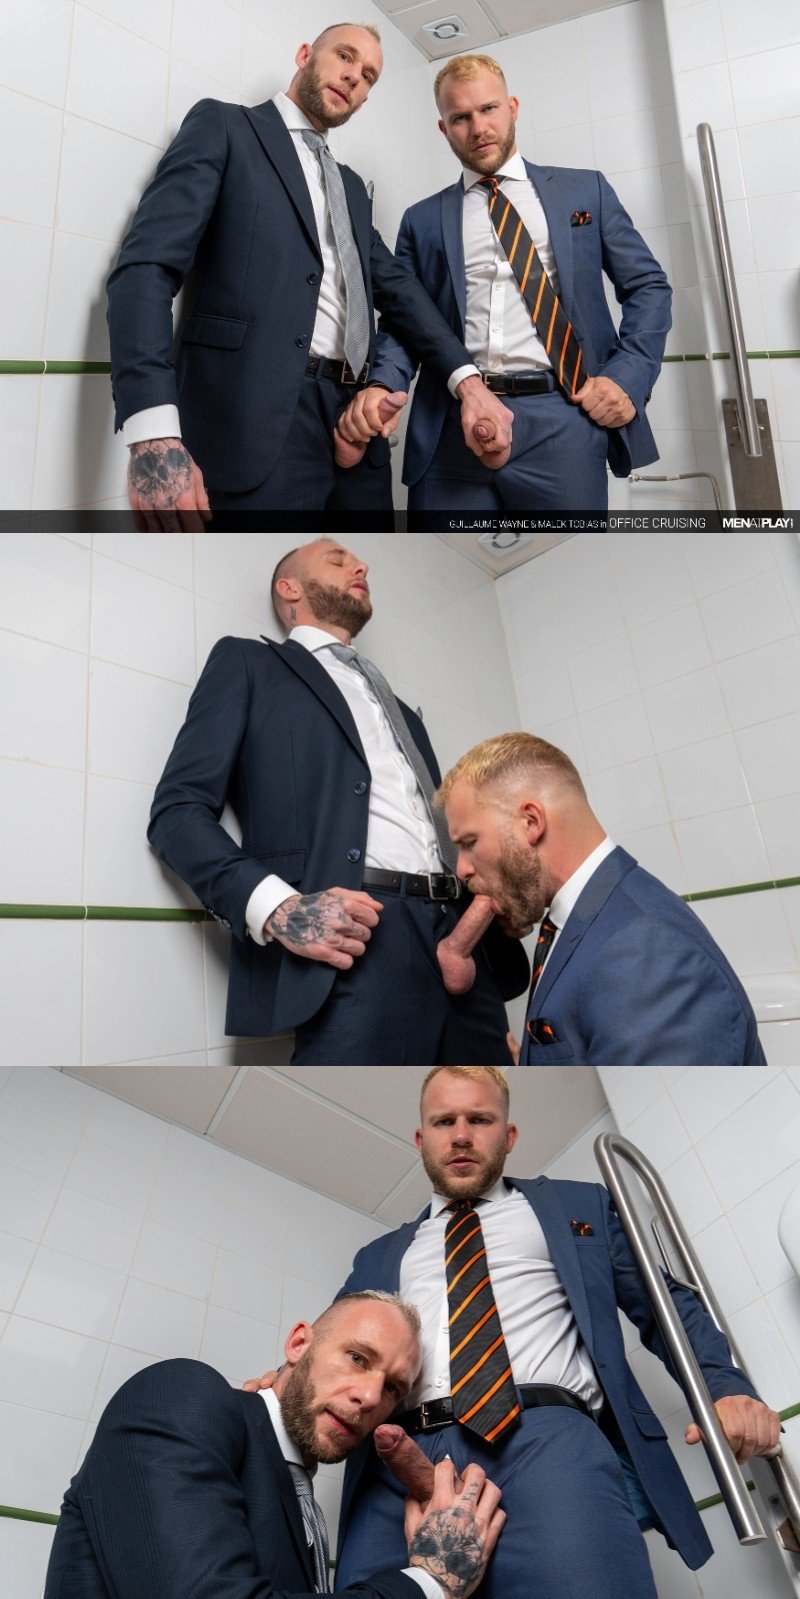 New Hire Fucks Sexy Executive in Private Office Toilet